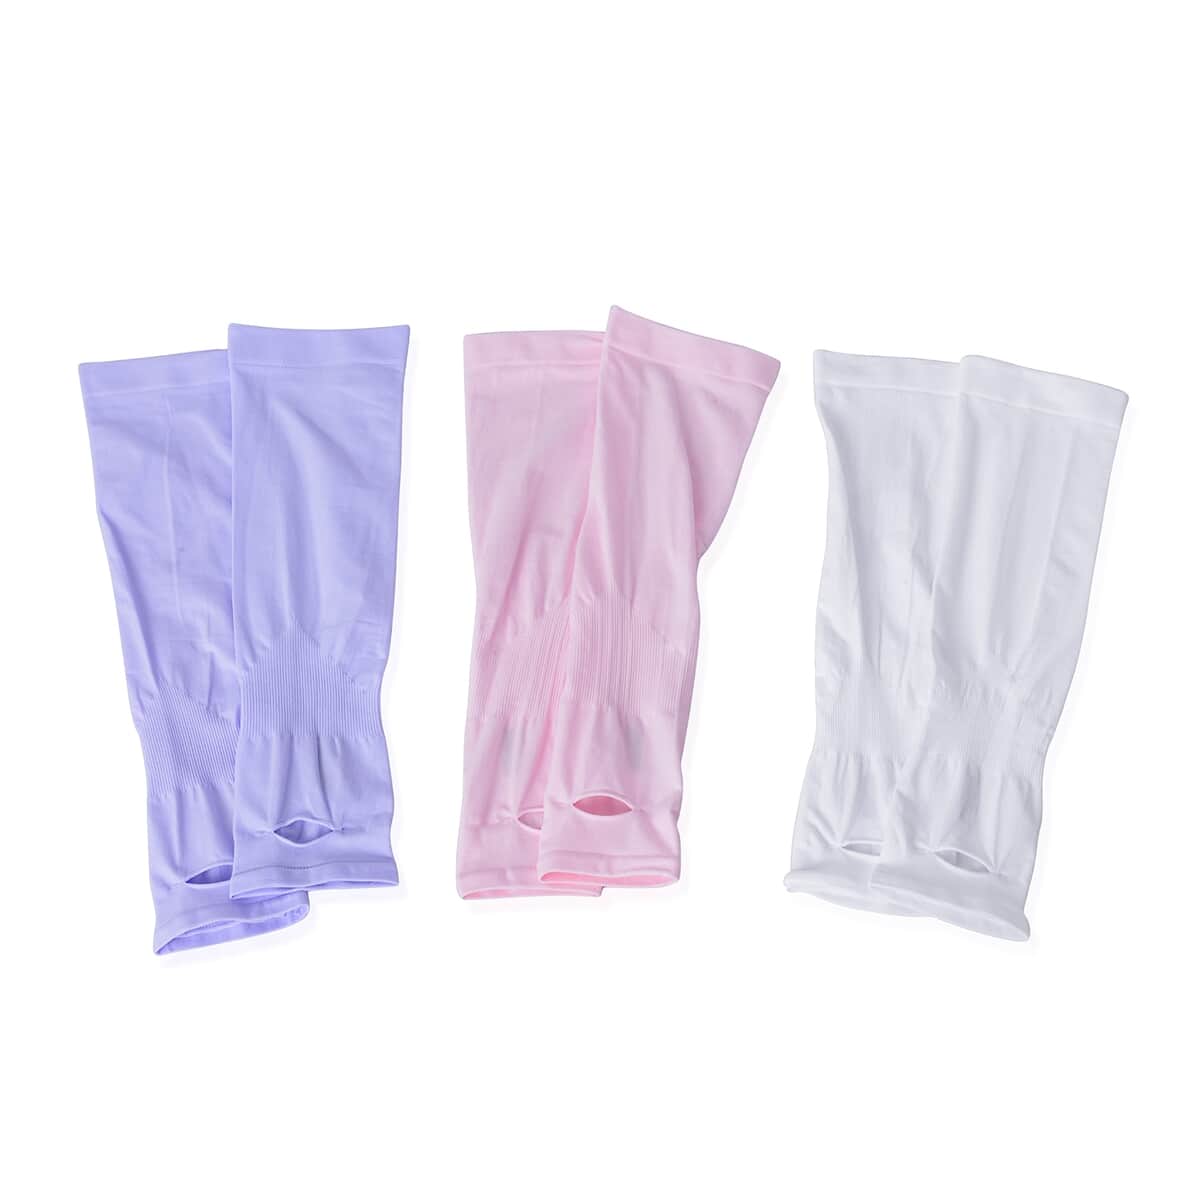 HOMESMART Set of 3 Pairs White, Lilac and Pink Cooling Sleeves (90% Polyamide and 10% Spandex) image number 0